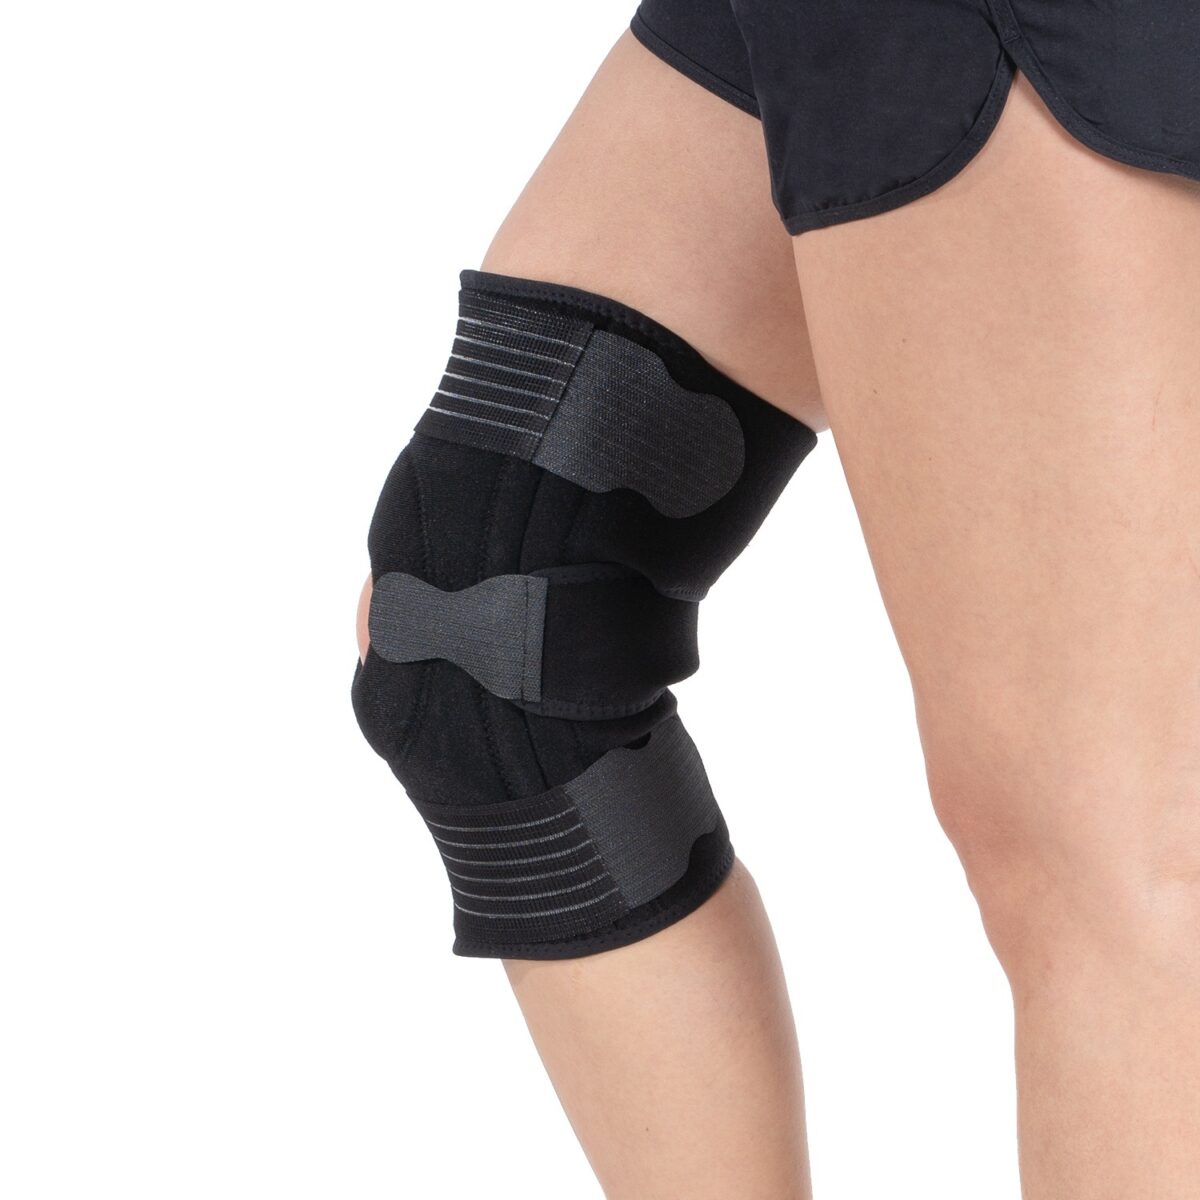 wingmed orthopedic equipments W507 ligament knee support 28